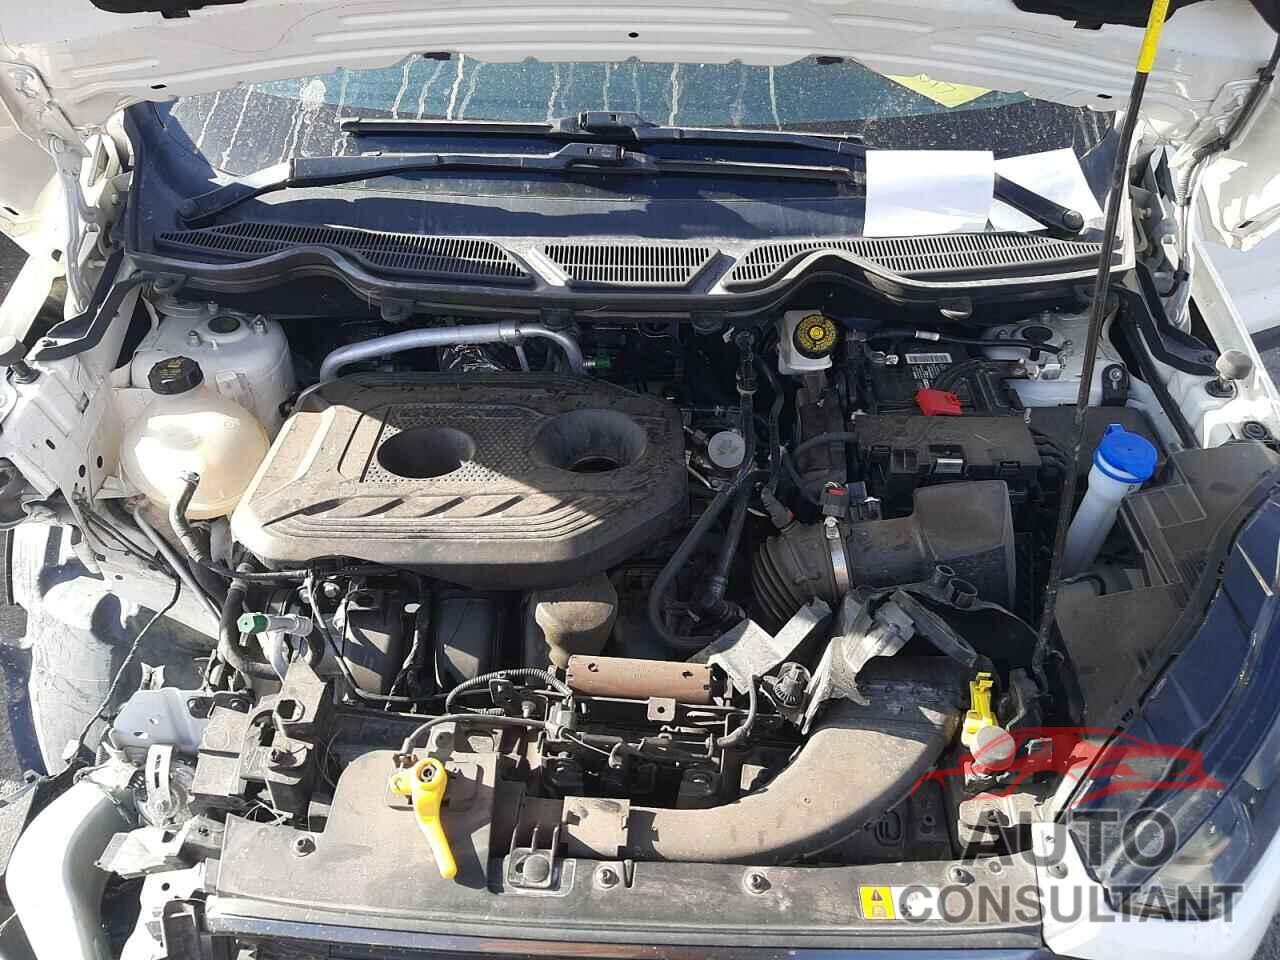 FORD ALL OTHER 2018 - MAJ6P1CL6JC219441